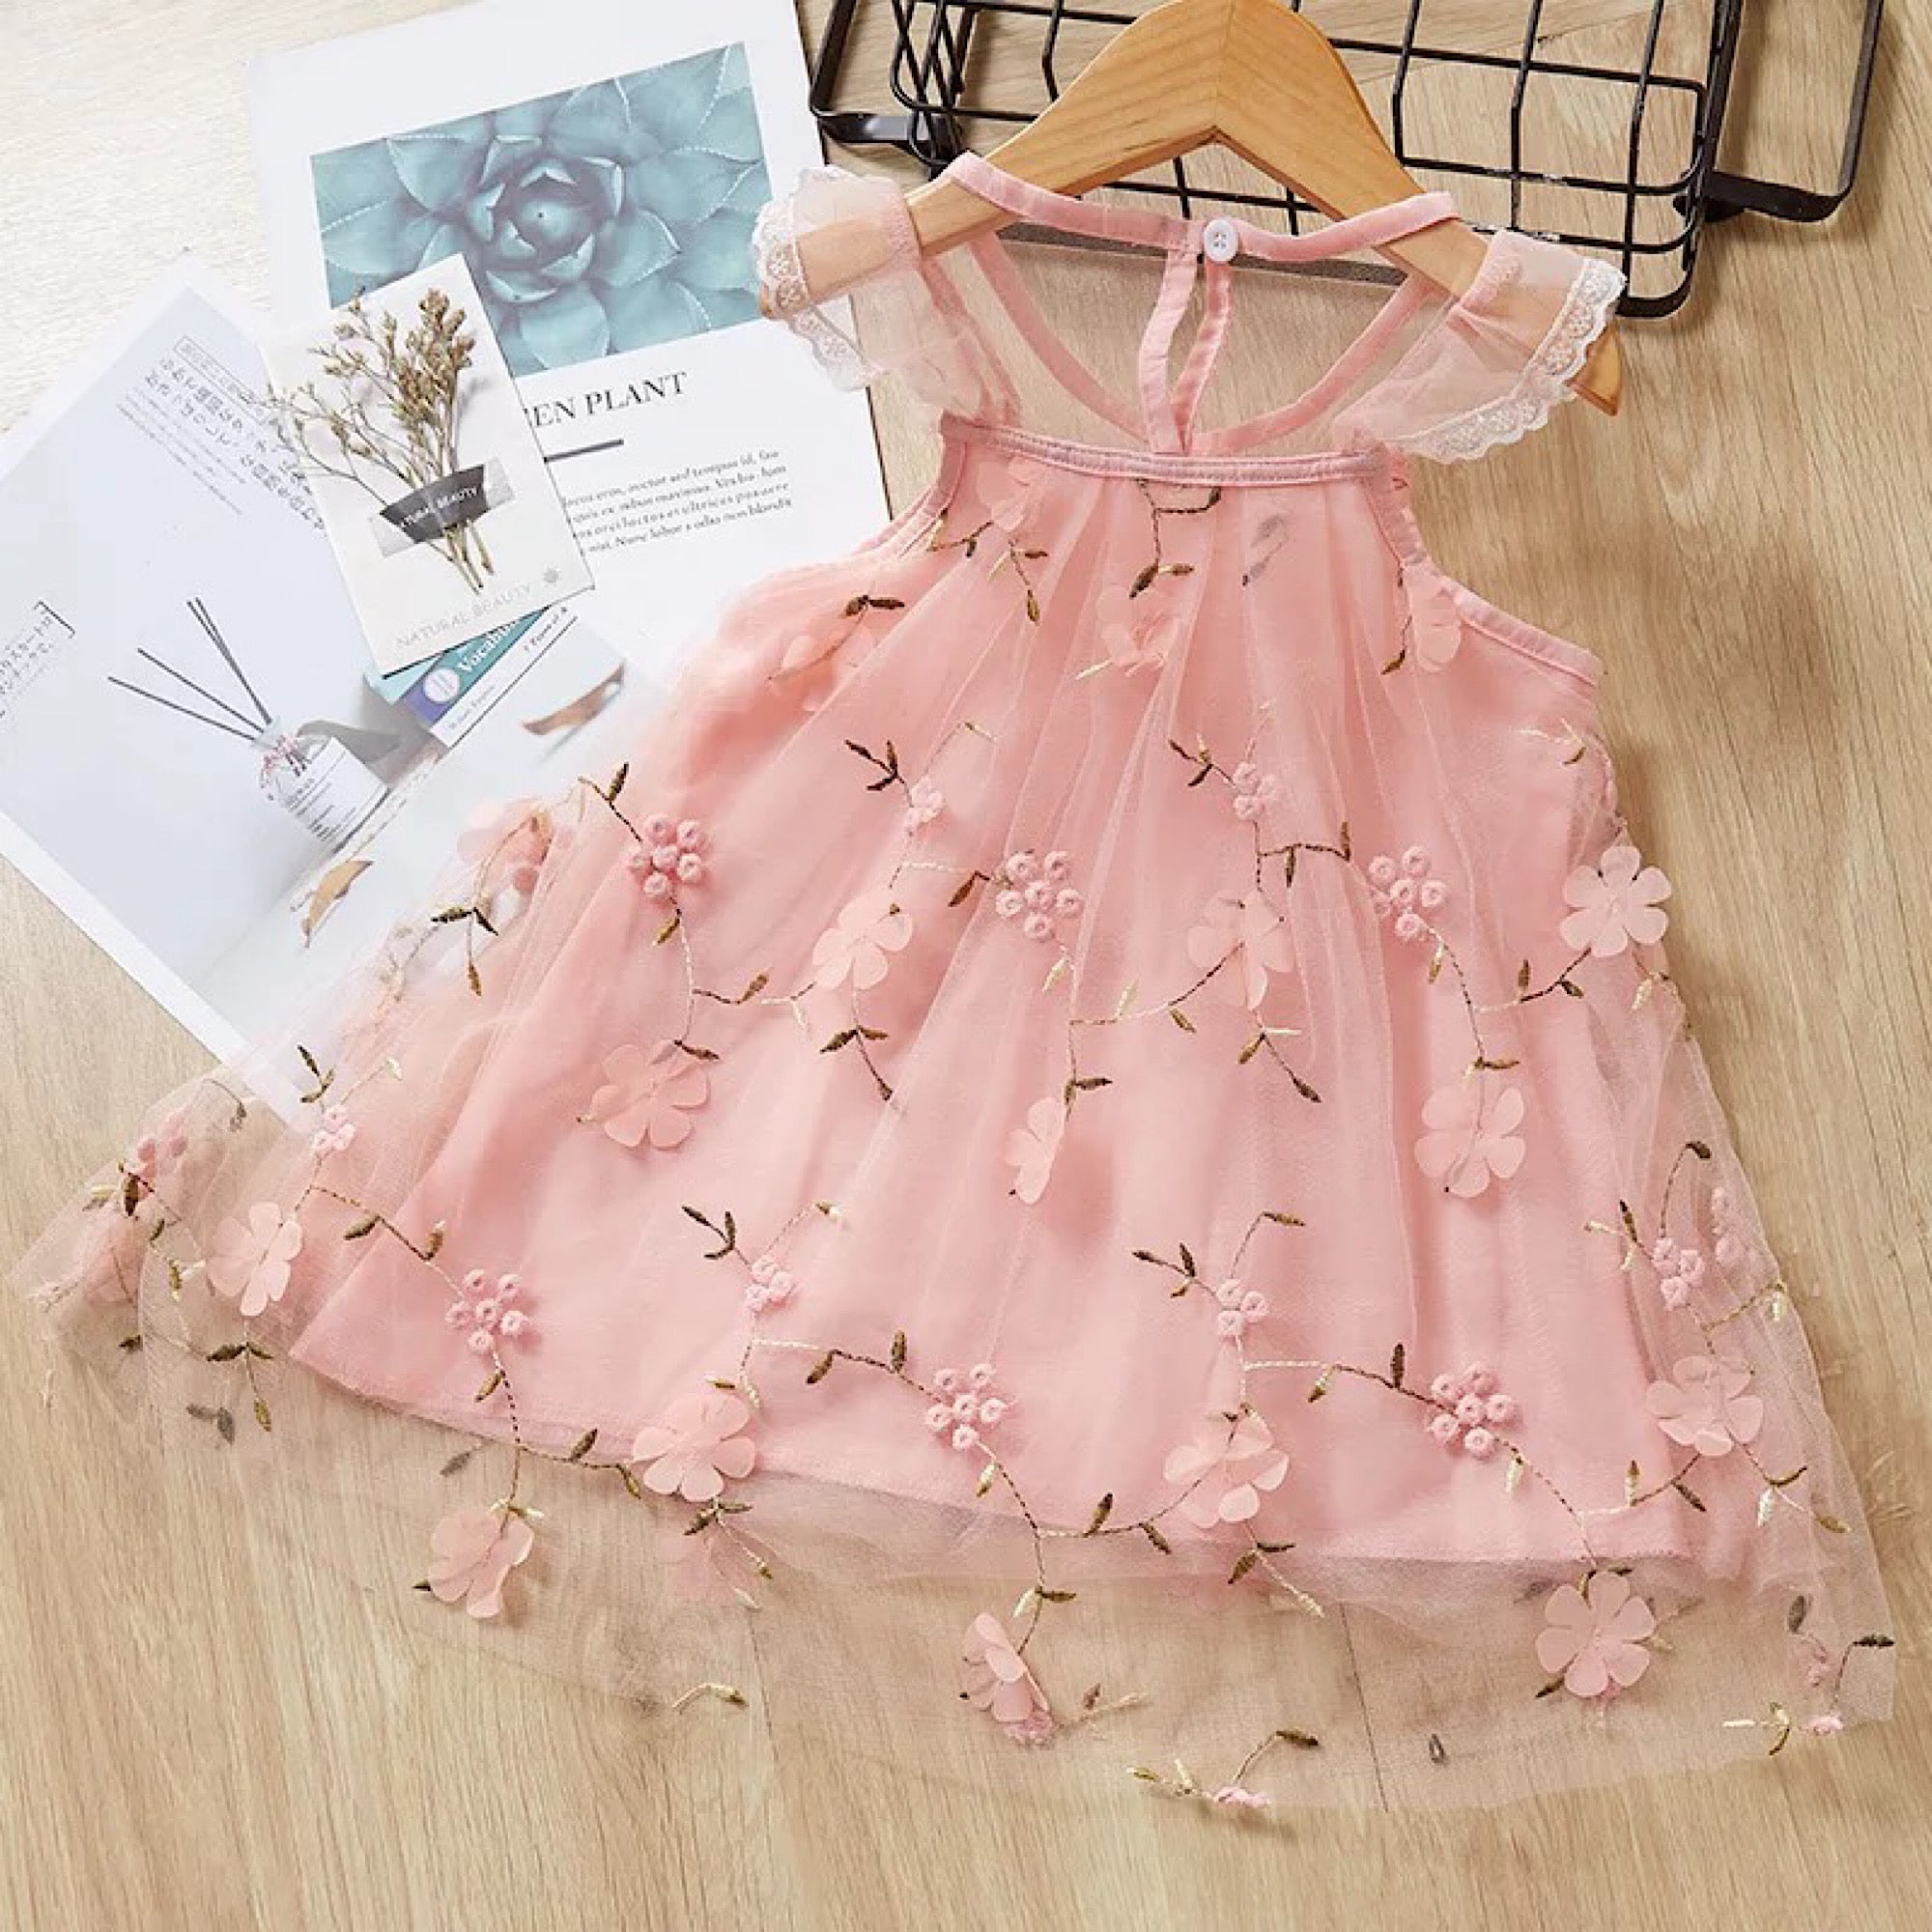 Baby Toddler Girls Easter Princess Swing Dress Embroidered Lace Mesh